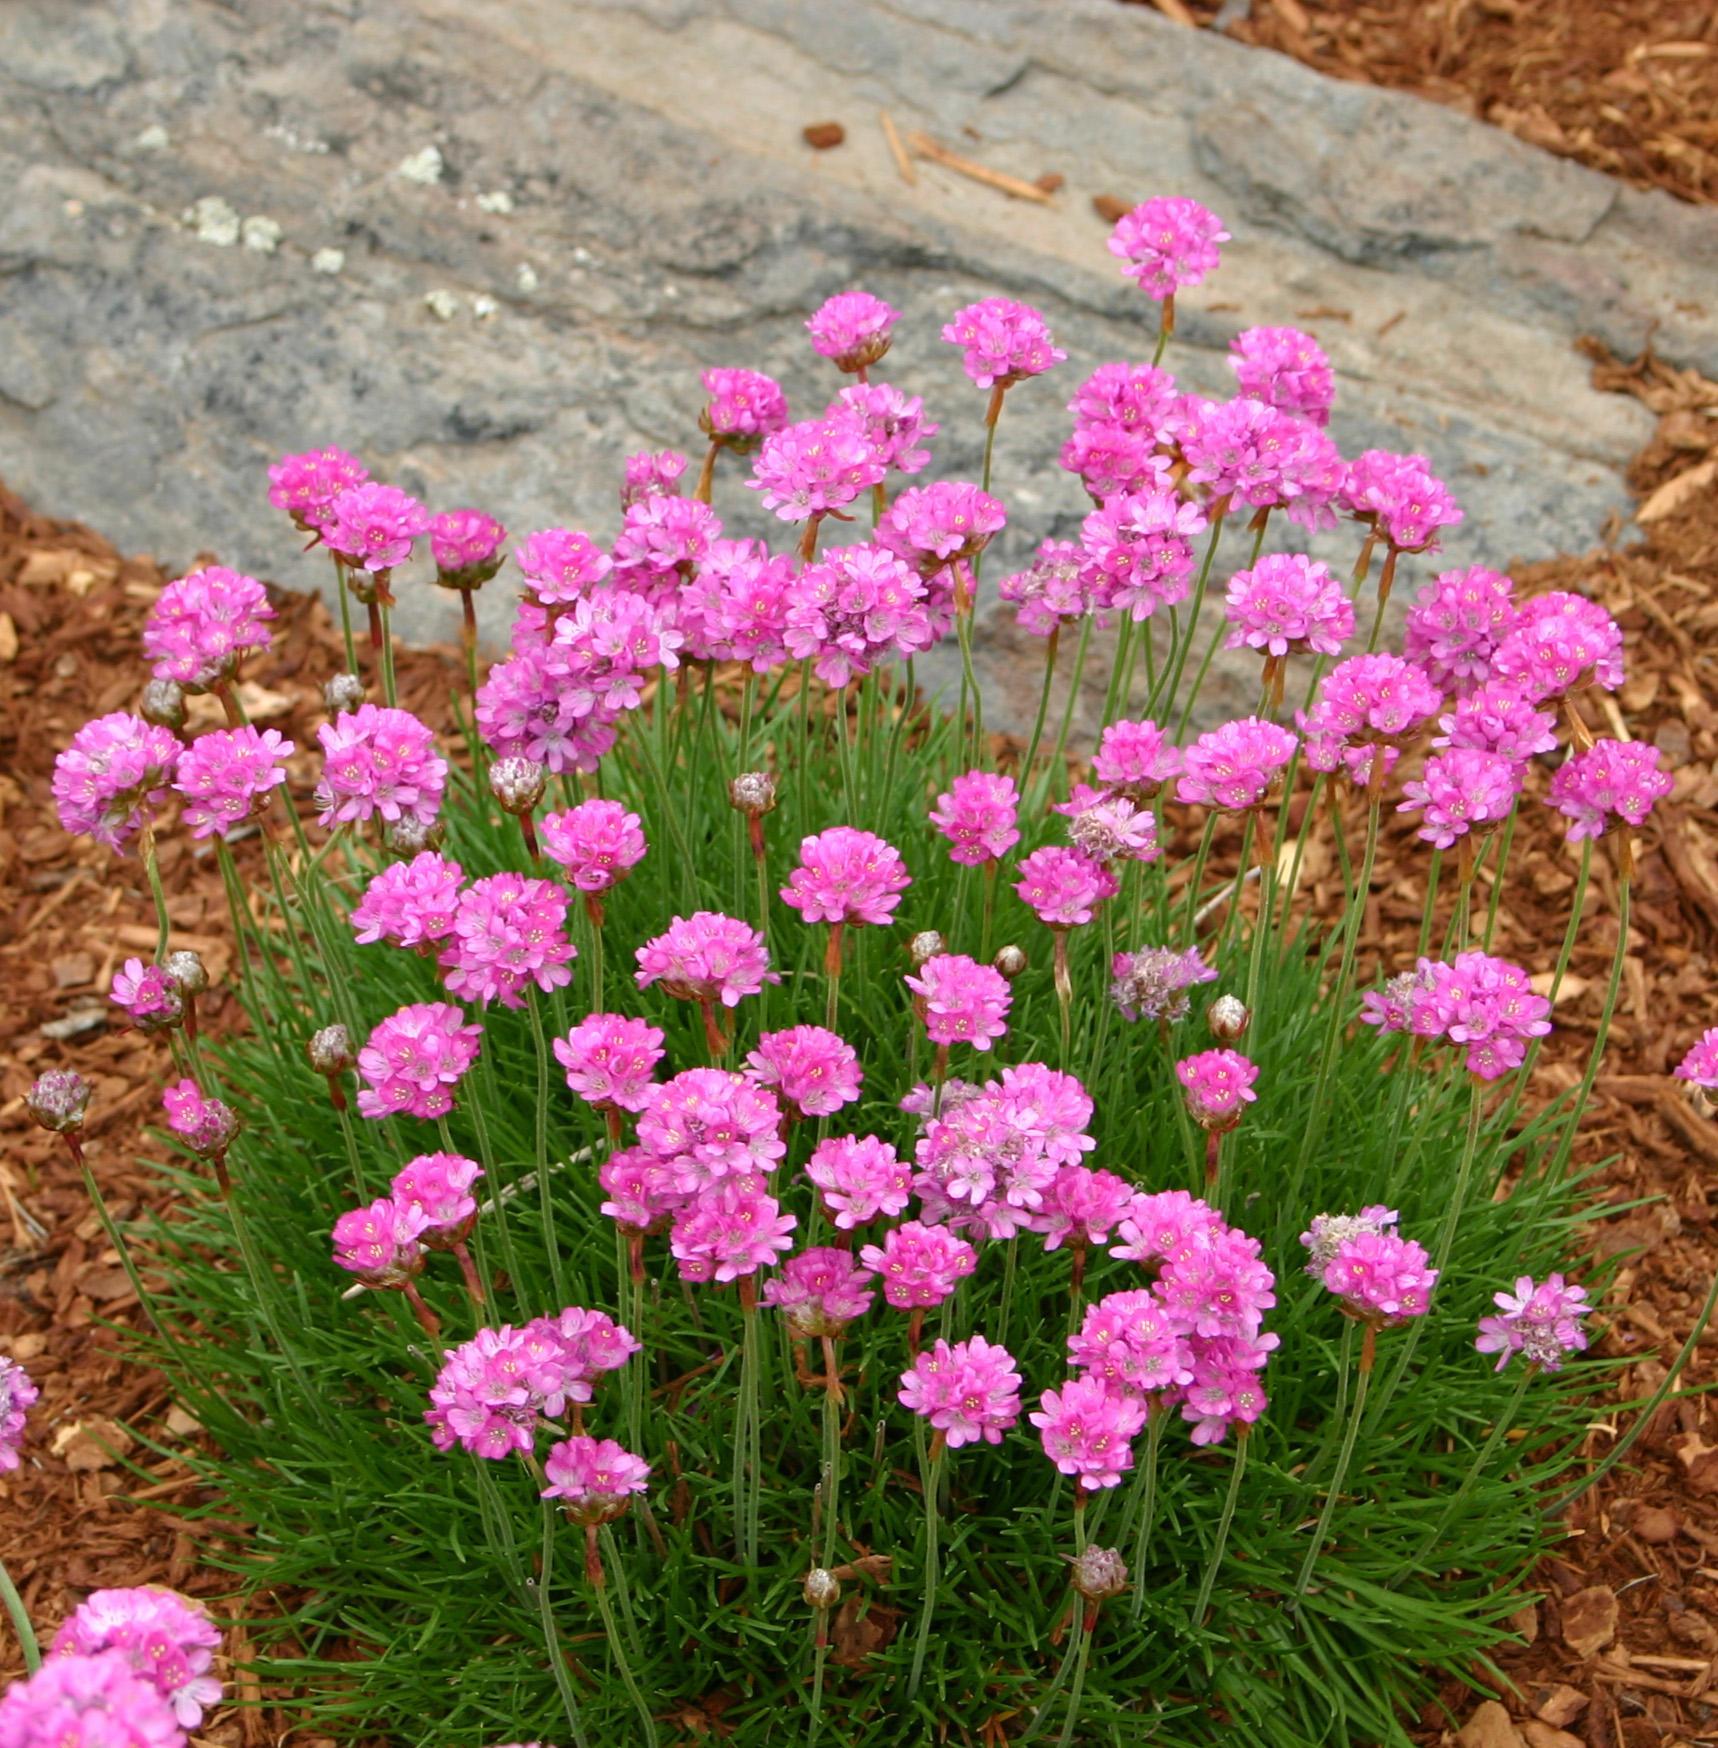 Dots of round pink blooms atop fernlike green foliage